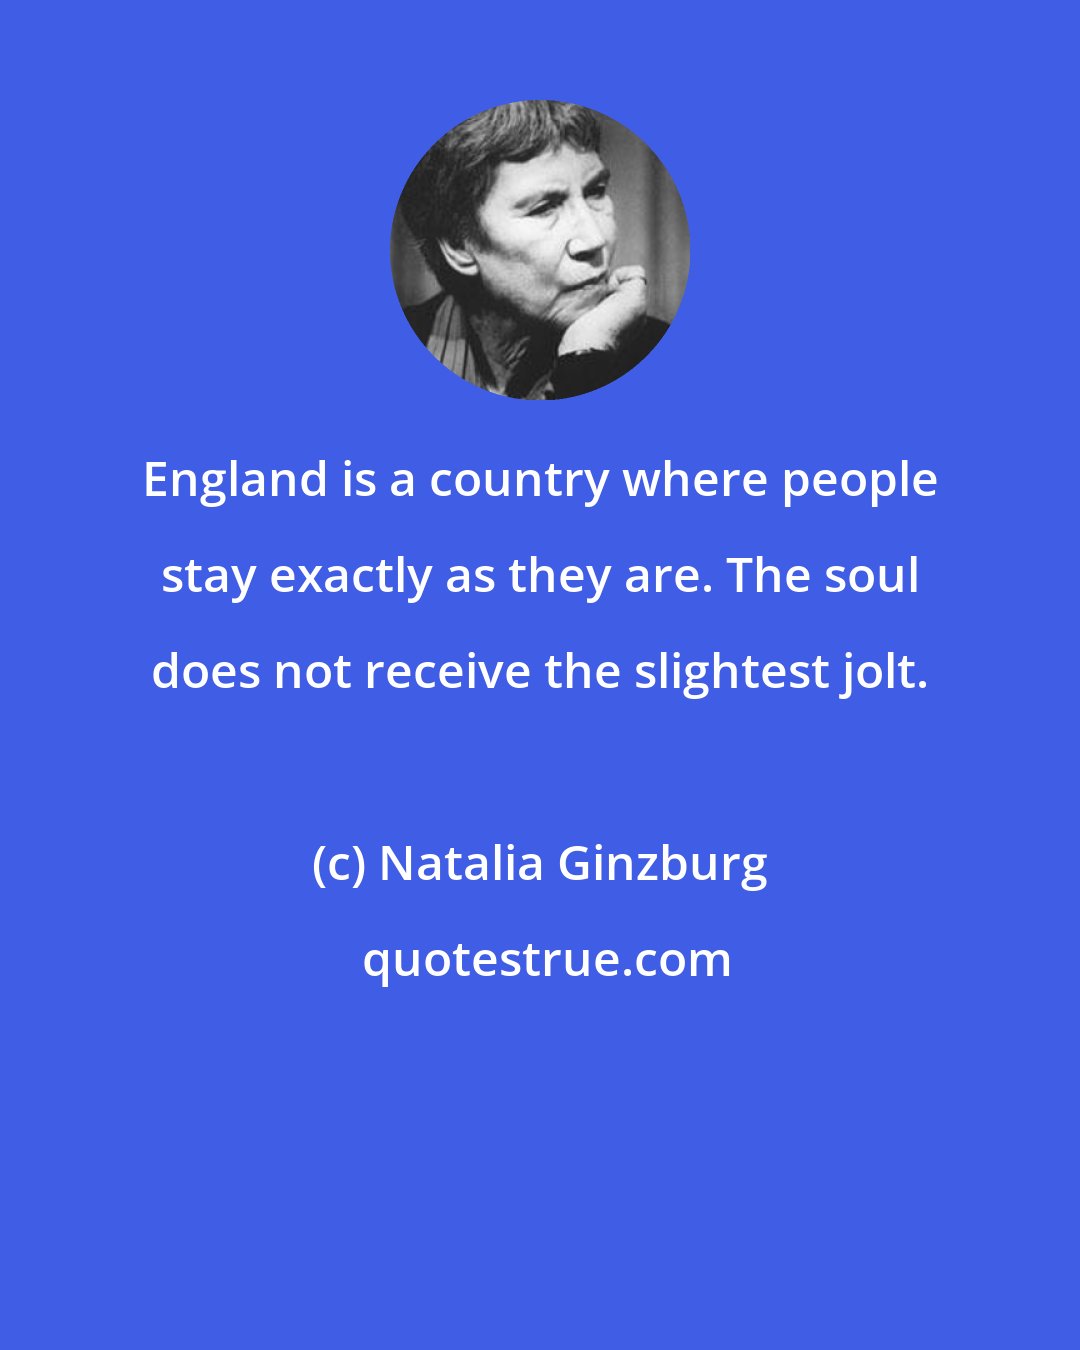 Natalia Ginzburg: England is a country where people stay exactly as they are. The soul does not receive the slightest jolt.